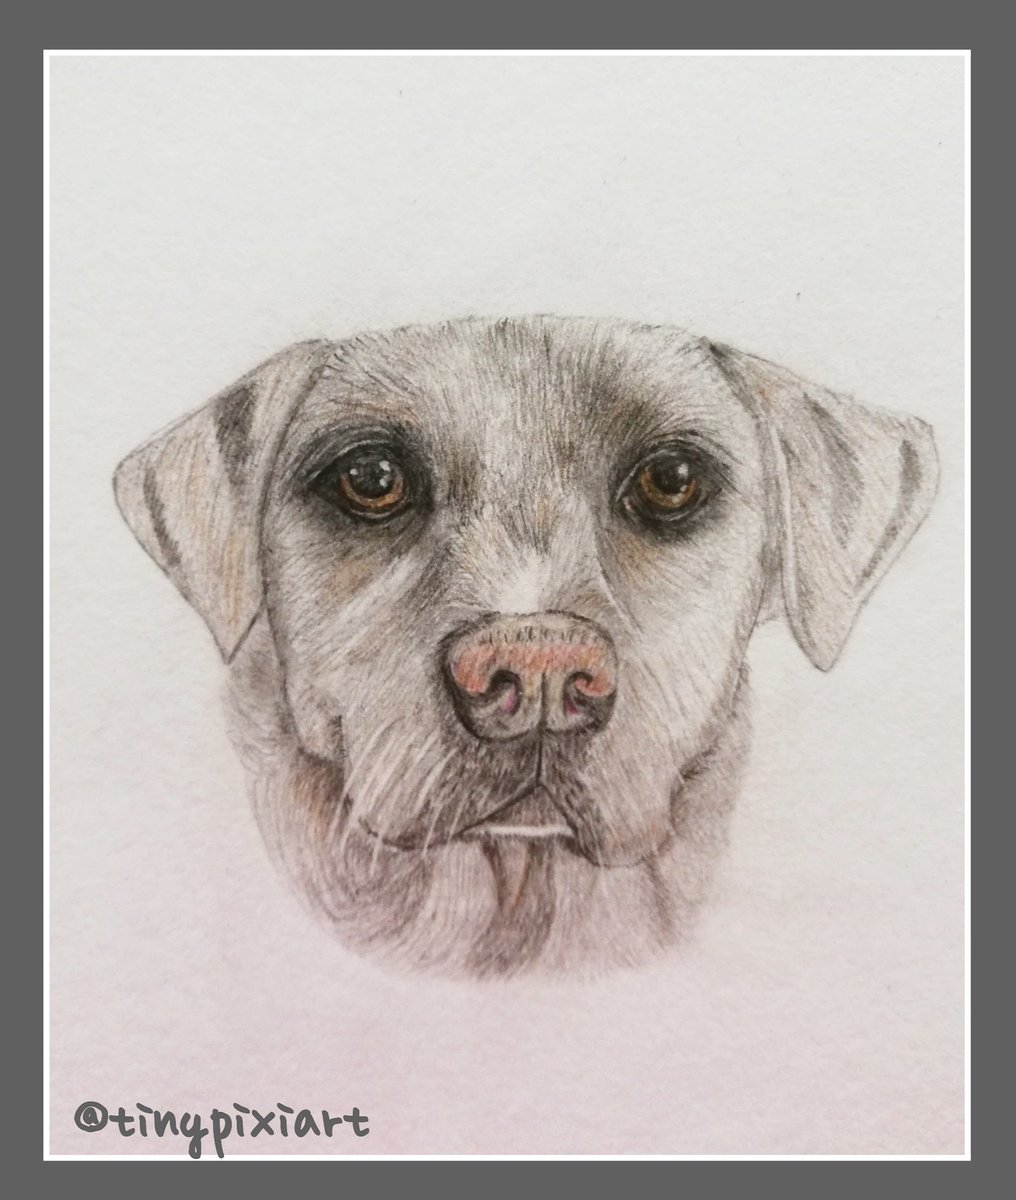 First ever dog portrait complete 🥰#catart #pencilart #pencildrawing #catdrawing #art #learningtodraw #petportrait #absolutebeginner #graphiteart  #drawing #graphite #graphitedrawing  #art #floatinghead #artwork #portrait #commission #dogart  #dogcommission